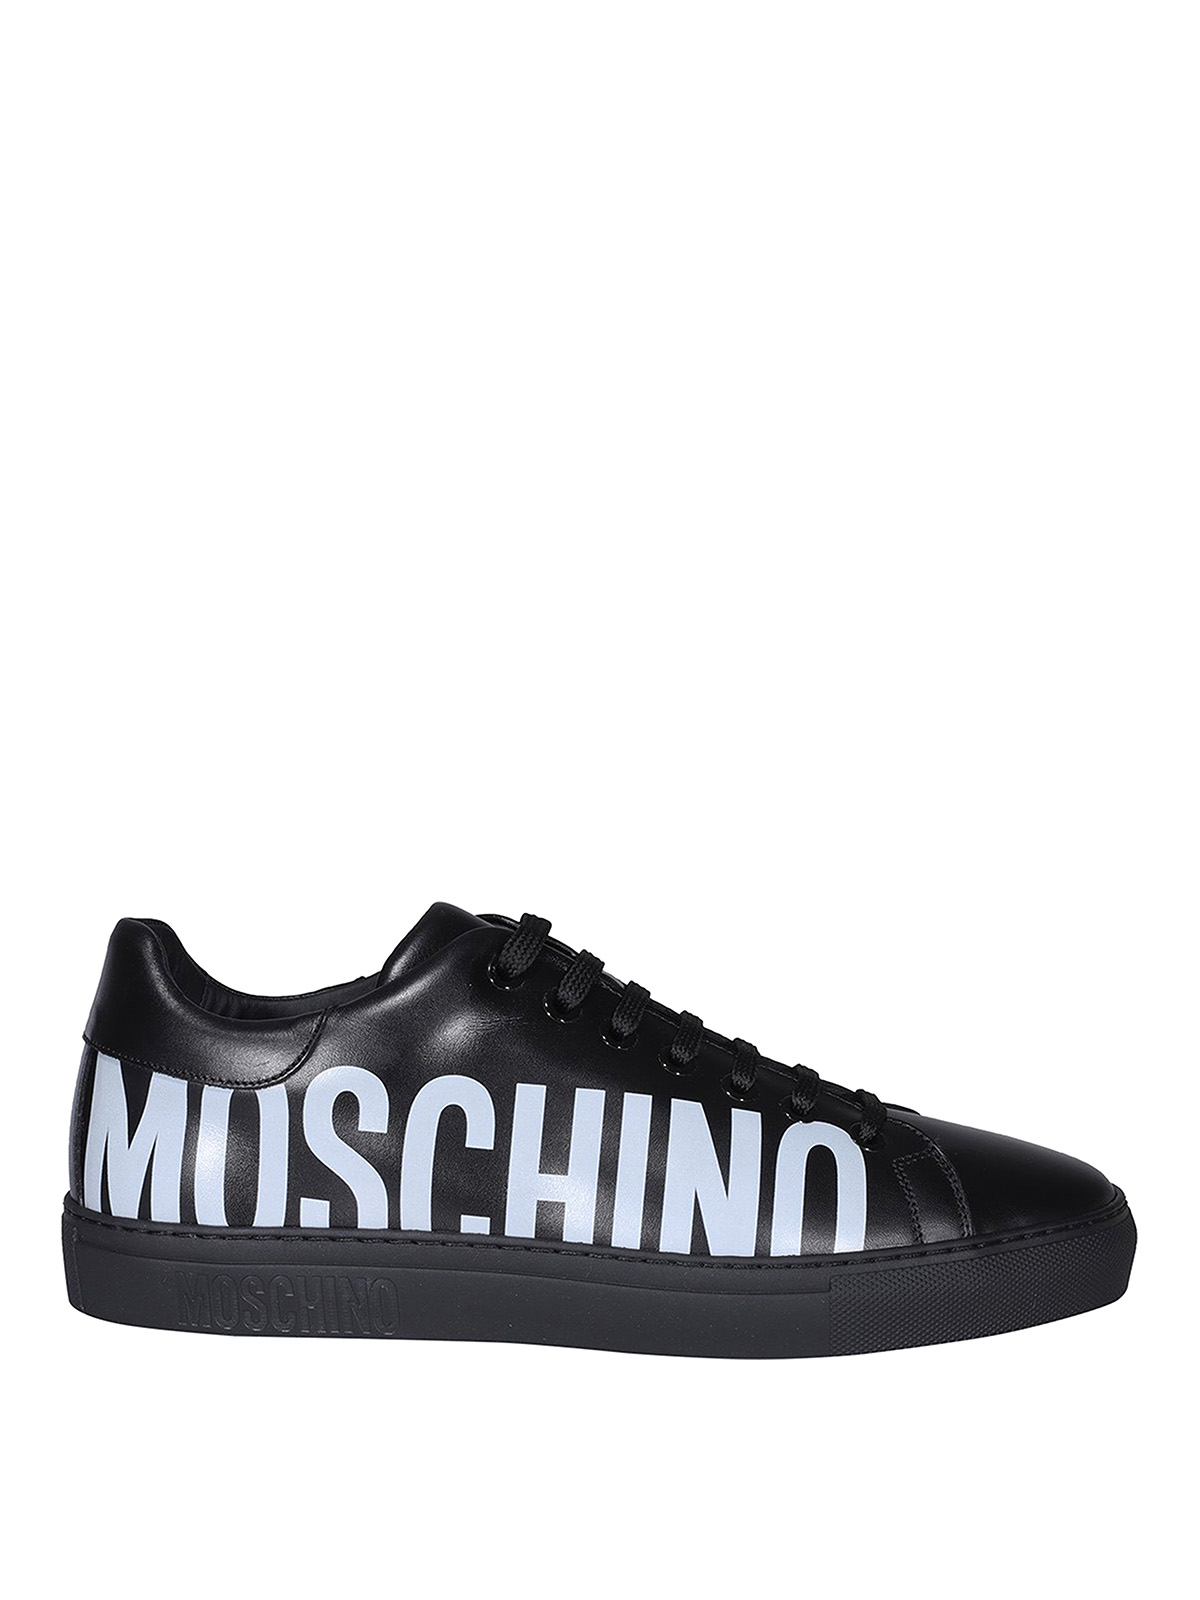 Trainers Moschino - Moschino sneakers - MB15012G1DGA0000 | iKRIX.com